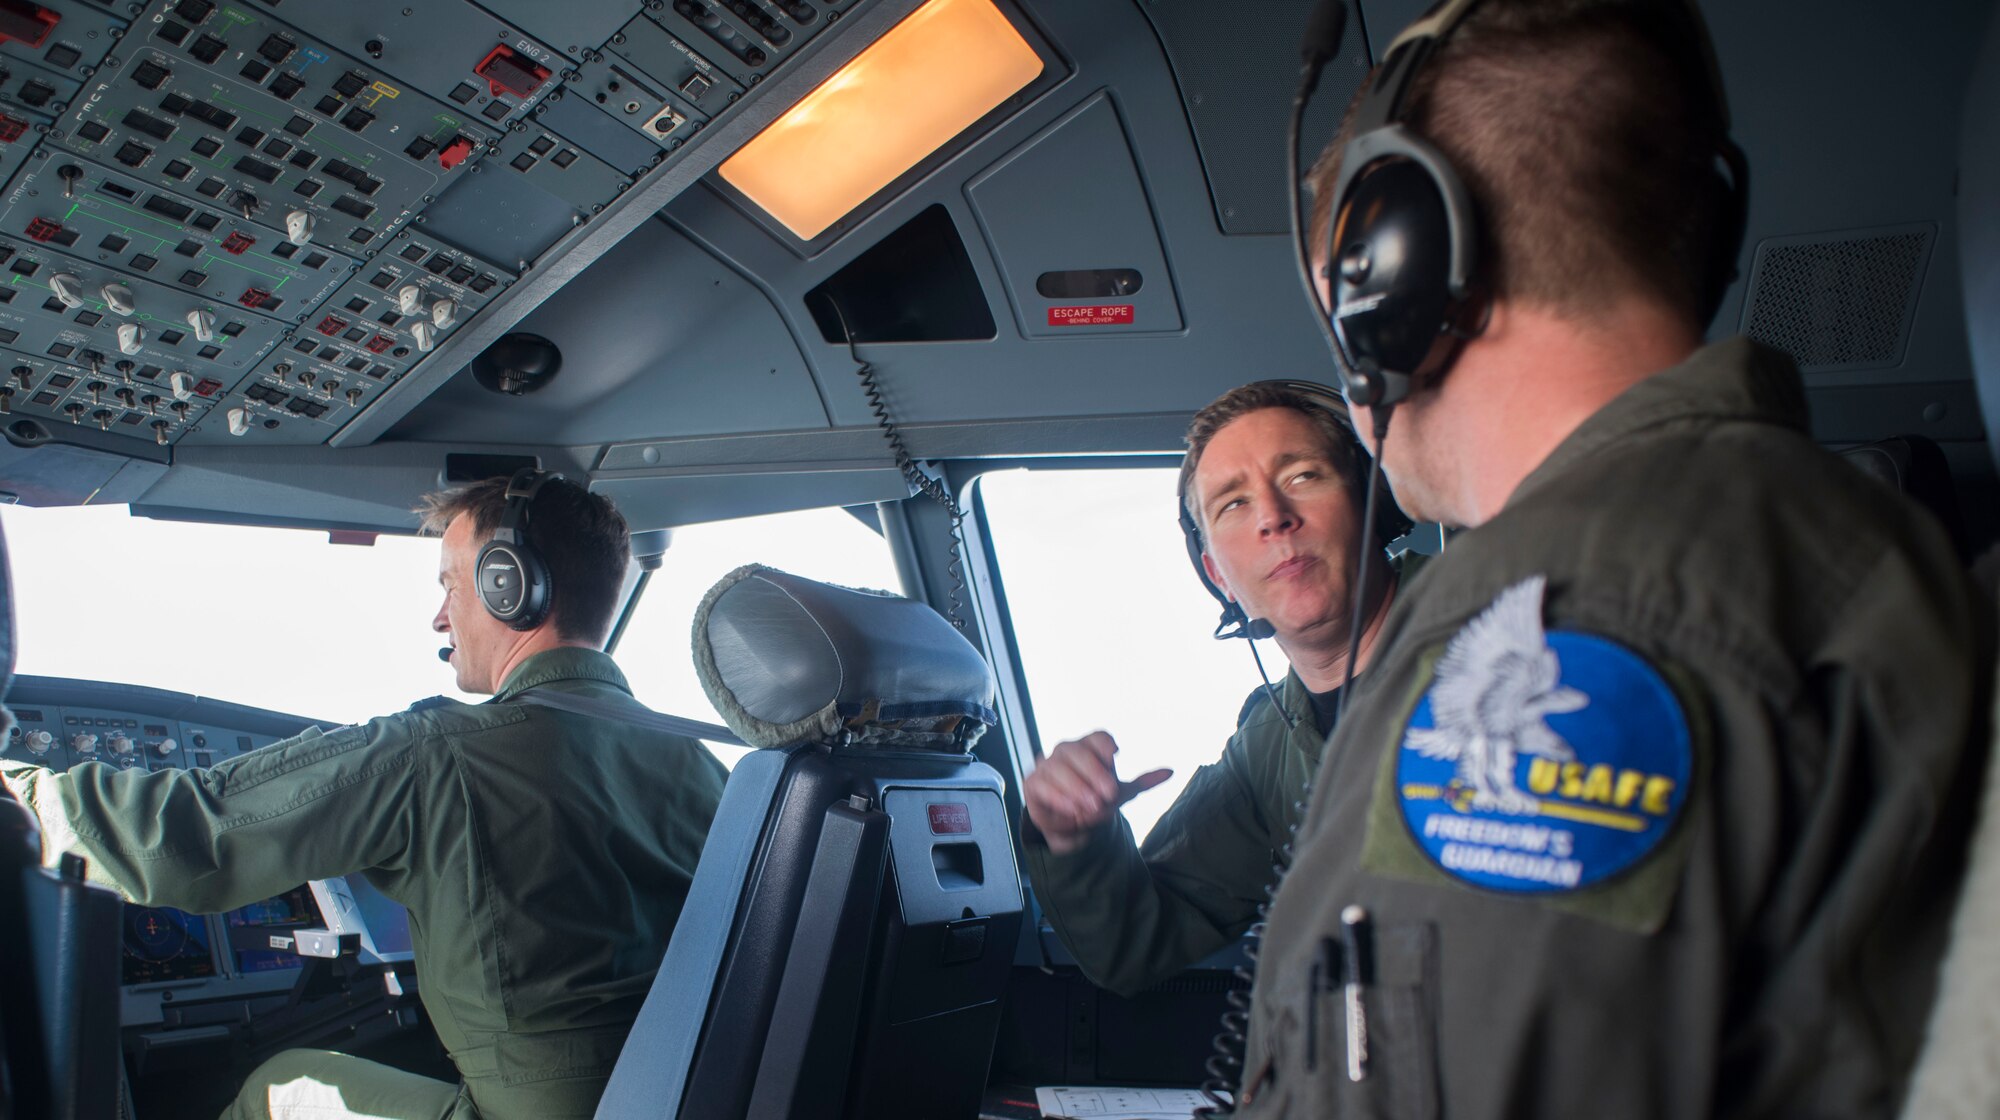 Royal Air Force Flight Lt. Jace Orr, left, and Wing Commander Pete Thorbjornsen fly the RAF Voyager over the North Sea during the European Tanker Symposium, May 17, 2018. The symposium is an annual event where NATO allies and partner nations with an interest in air refueling capabilities gather to discuss tanker formation flights. (U.S. Air Force photo by Airman 1st Class Alexandria Lee)